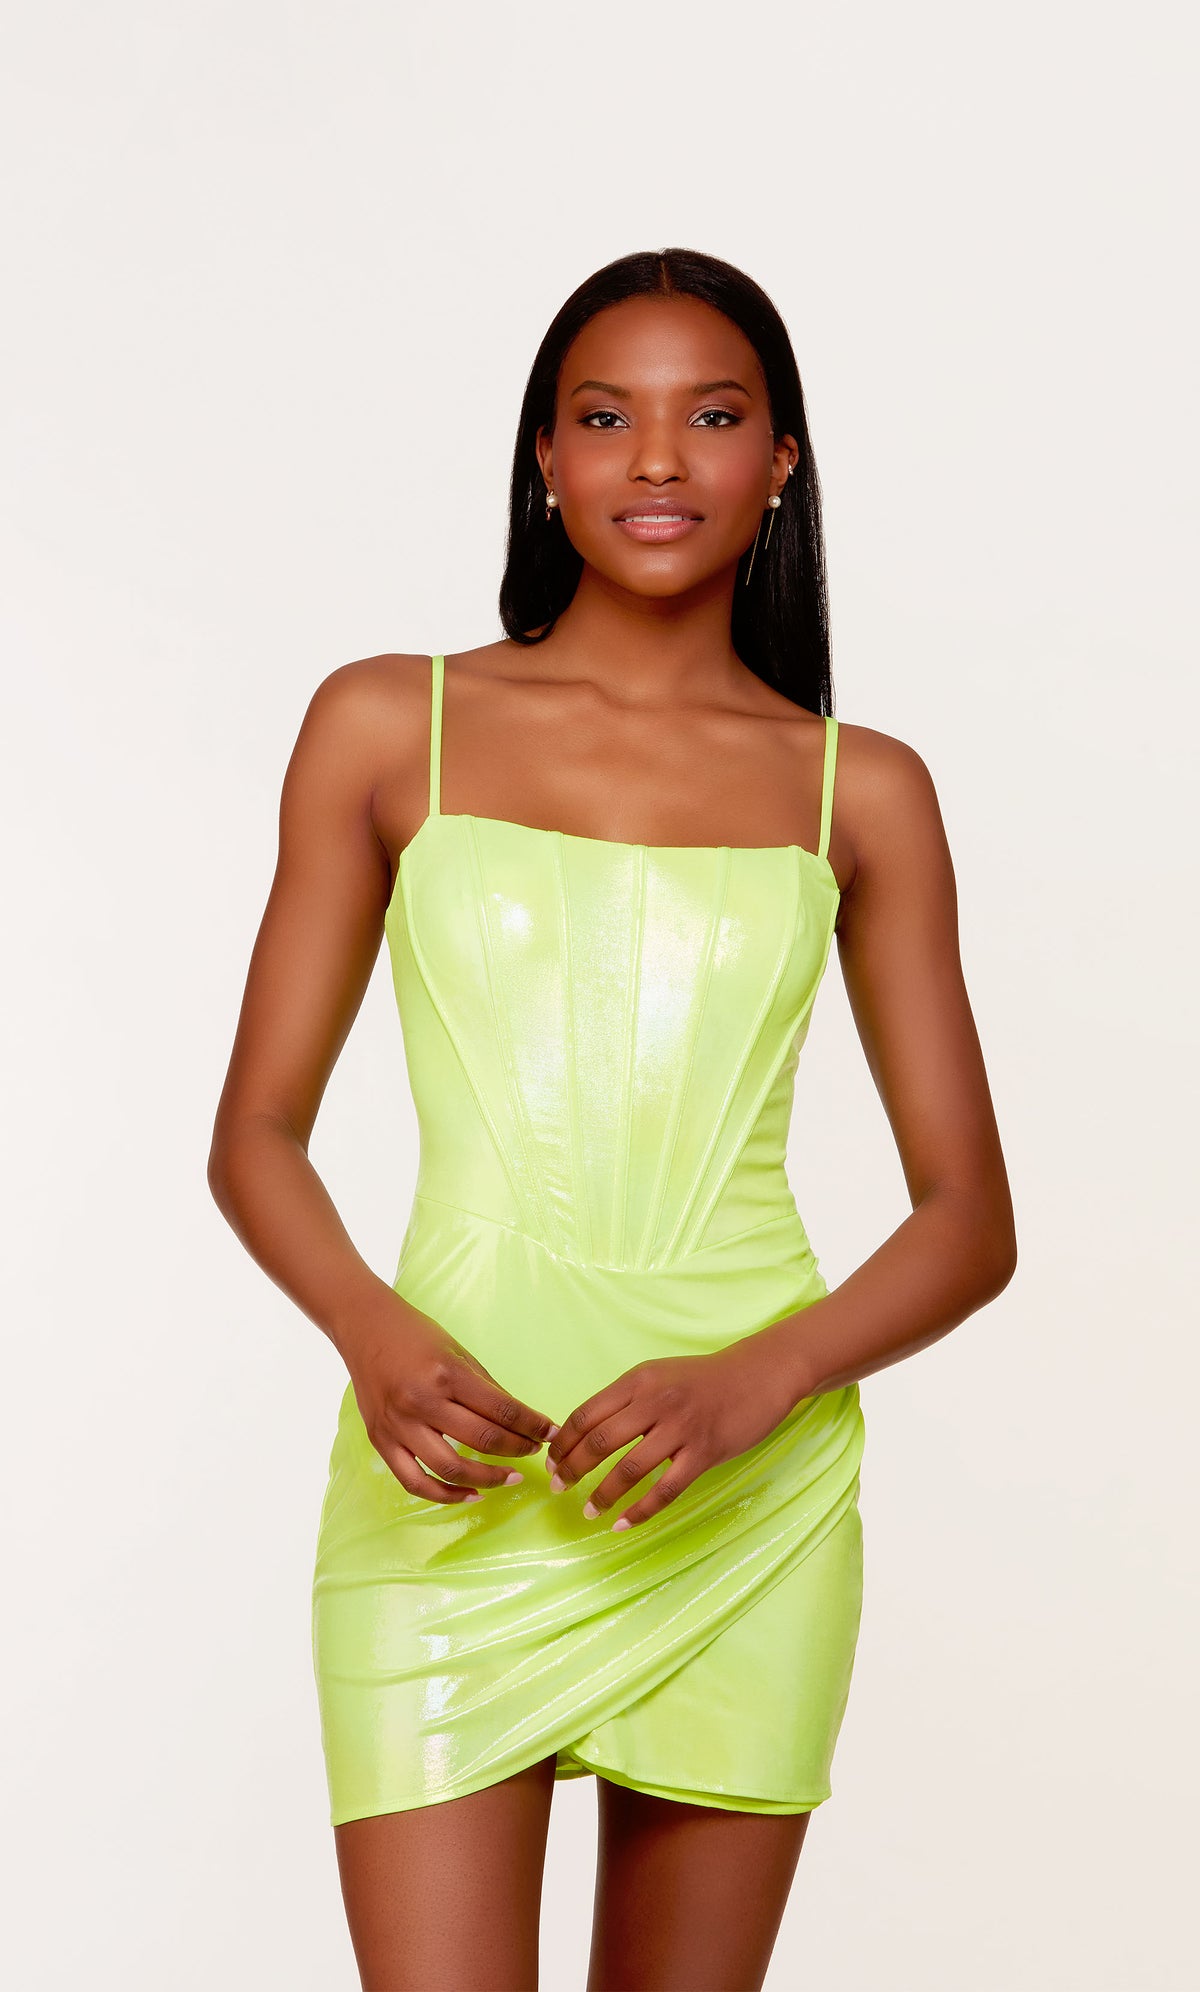 A fun, neon-green corset dress featuring a straight across neckline with thin, adjustable spaghetti straps and a ruched wrap skirt.